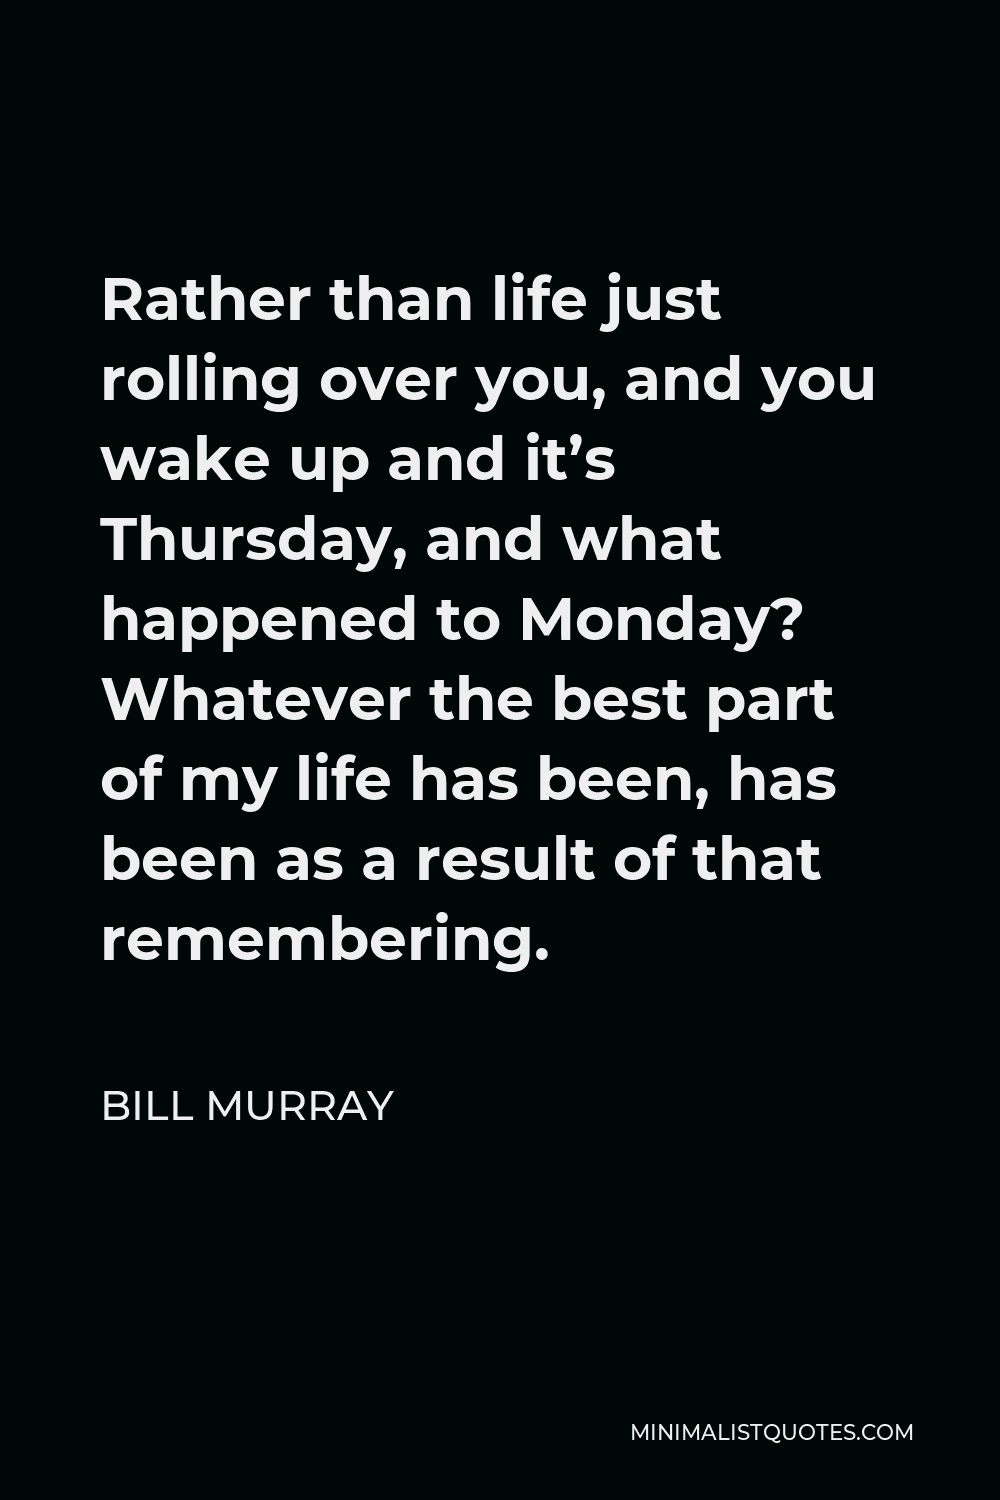 Bill Murray Quote - Rather than life just rolling over you, and you wake up and it’s Thursday, and what happened to Monday? Whatever the best part of my life has been, has been as a result of that remembering.